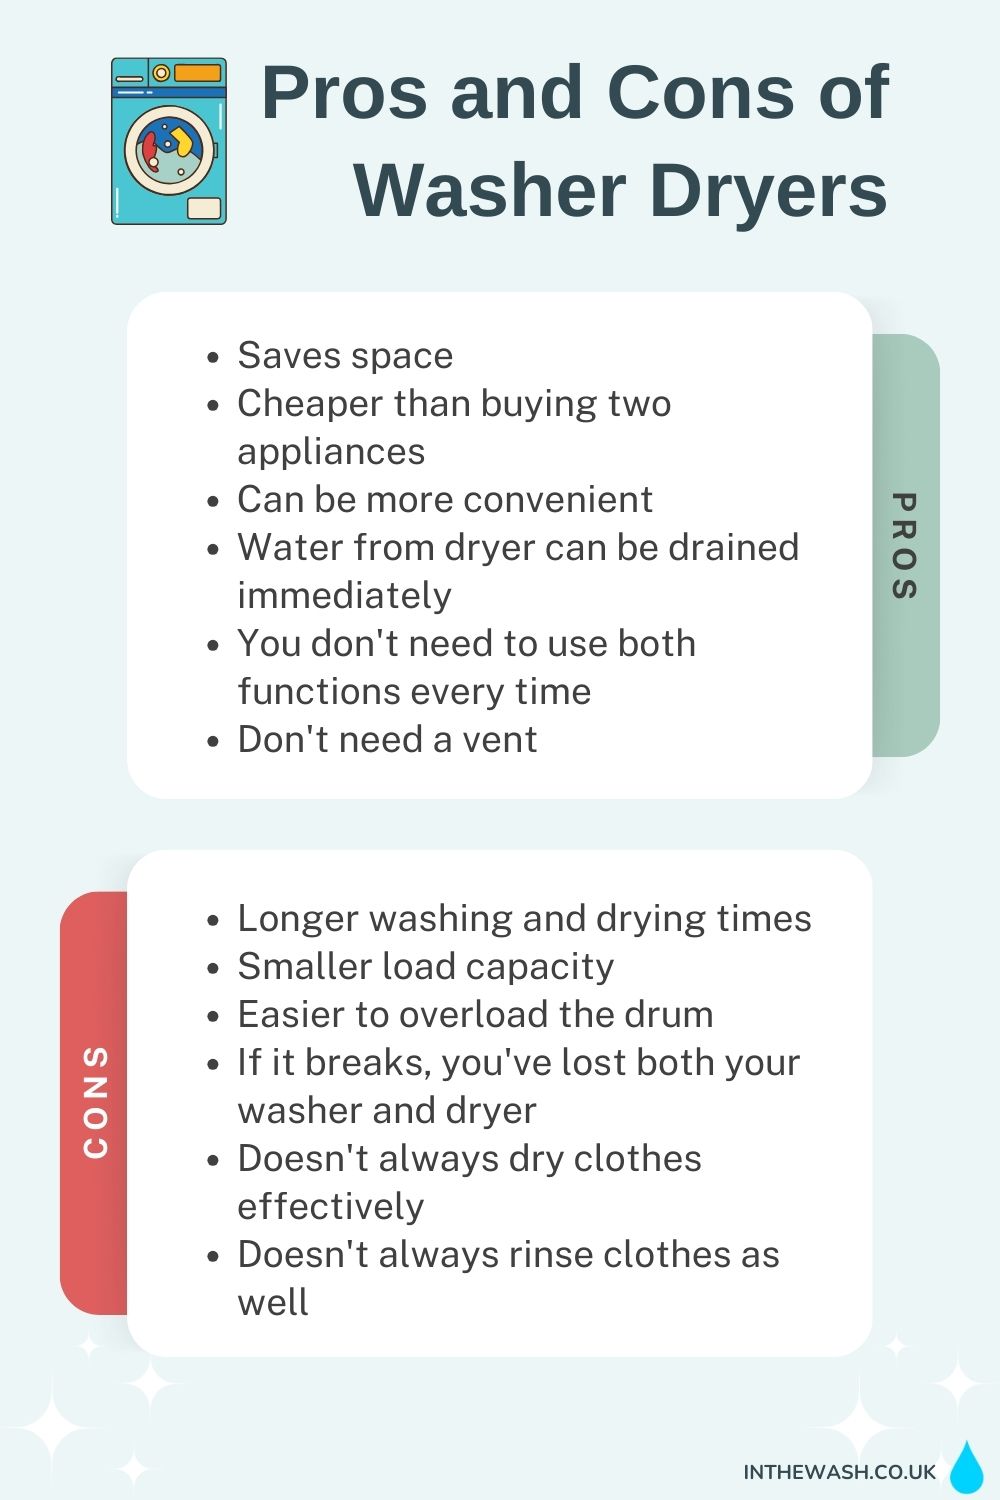 Pros and cons of washer dryers